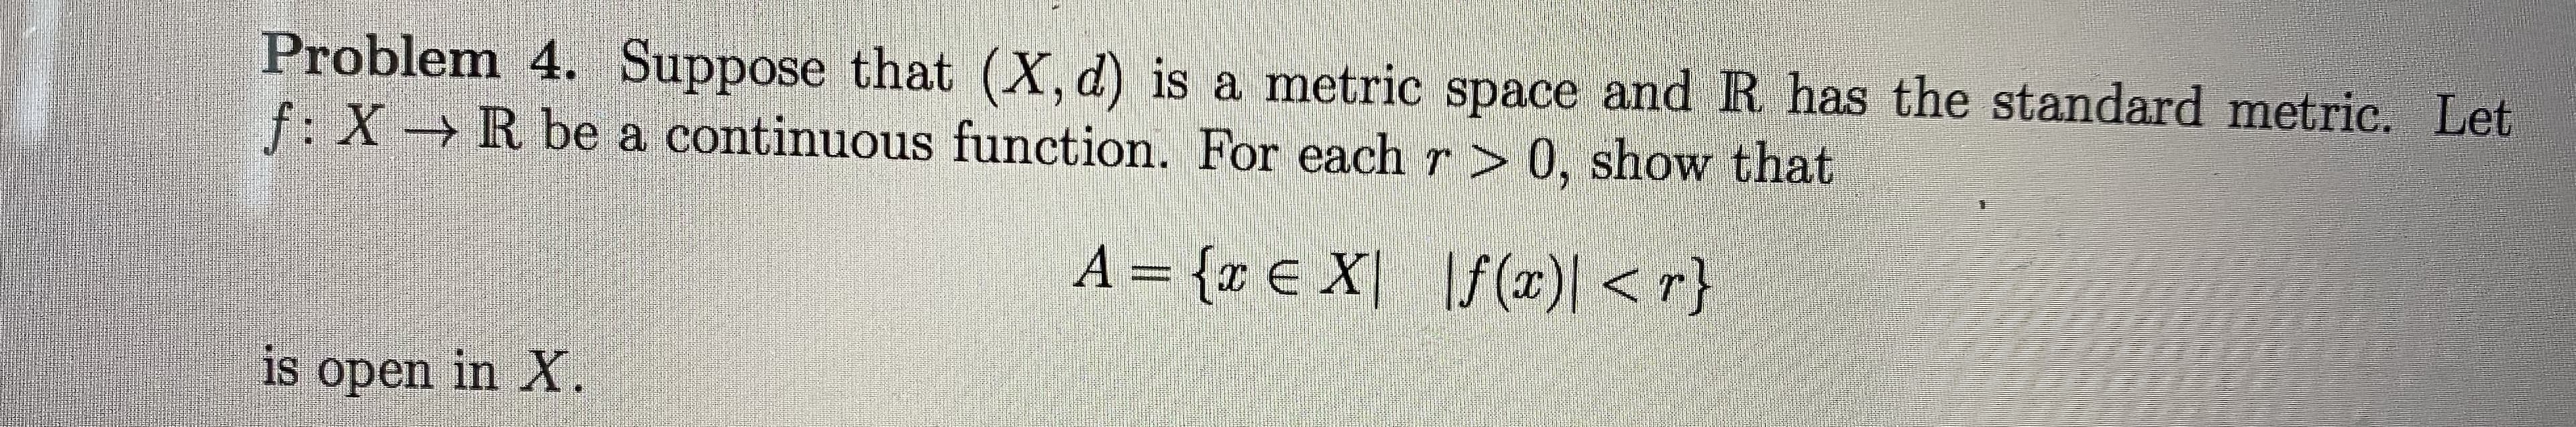 Problem 4. Suppose that (X, d) is a metric space and R has the standard metric. Let
f: X R be a continuous function. For each r > 0, show that
